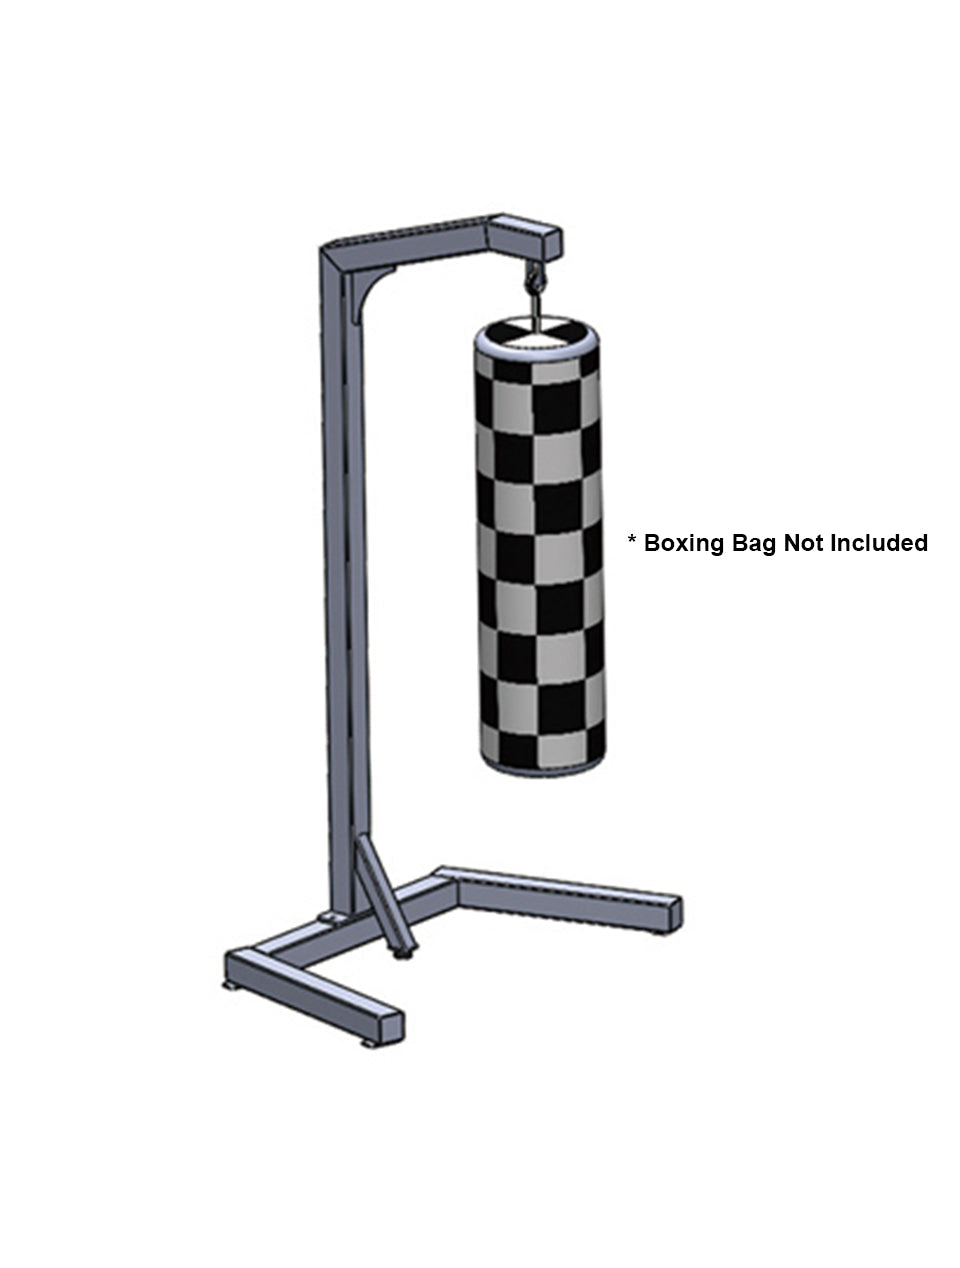 1441 Fitness Punching Bag Stand - 41FC22